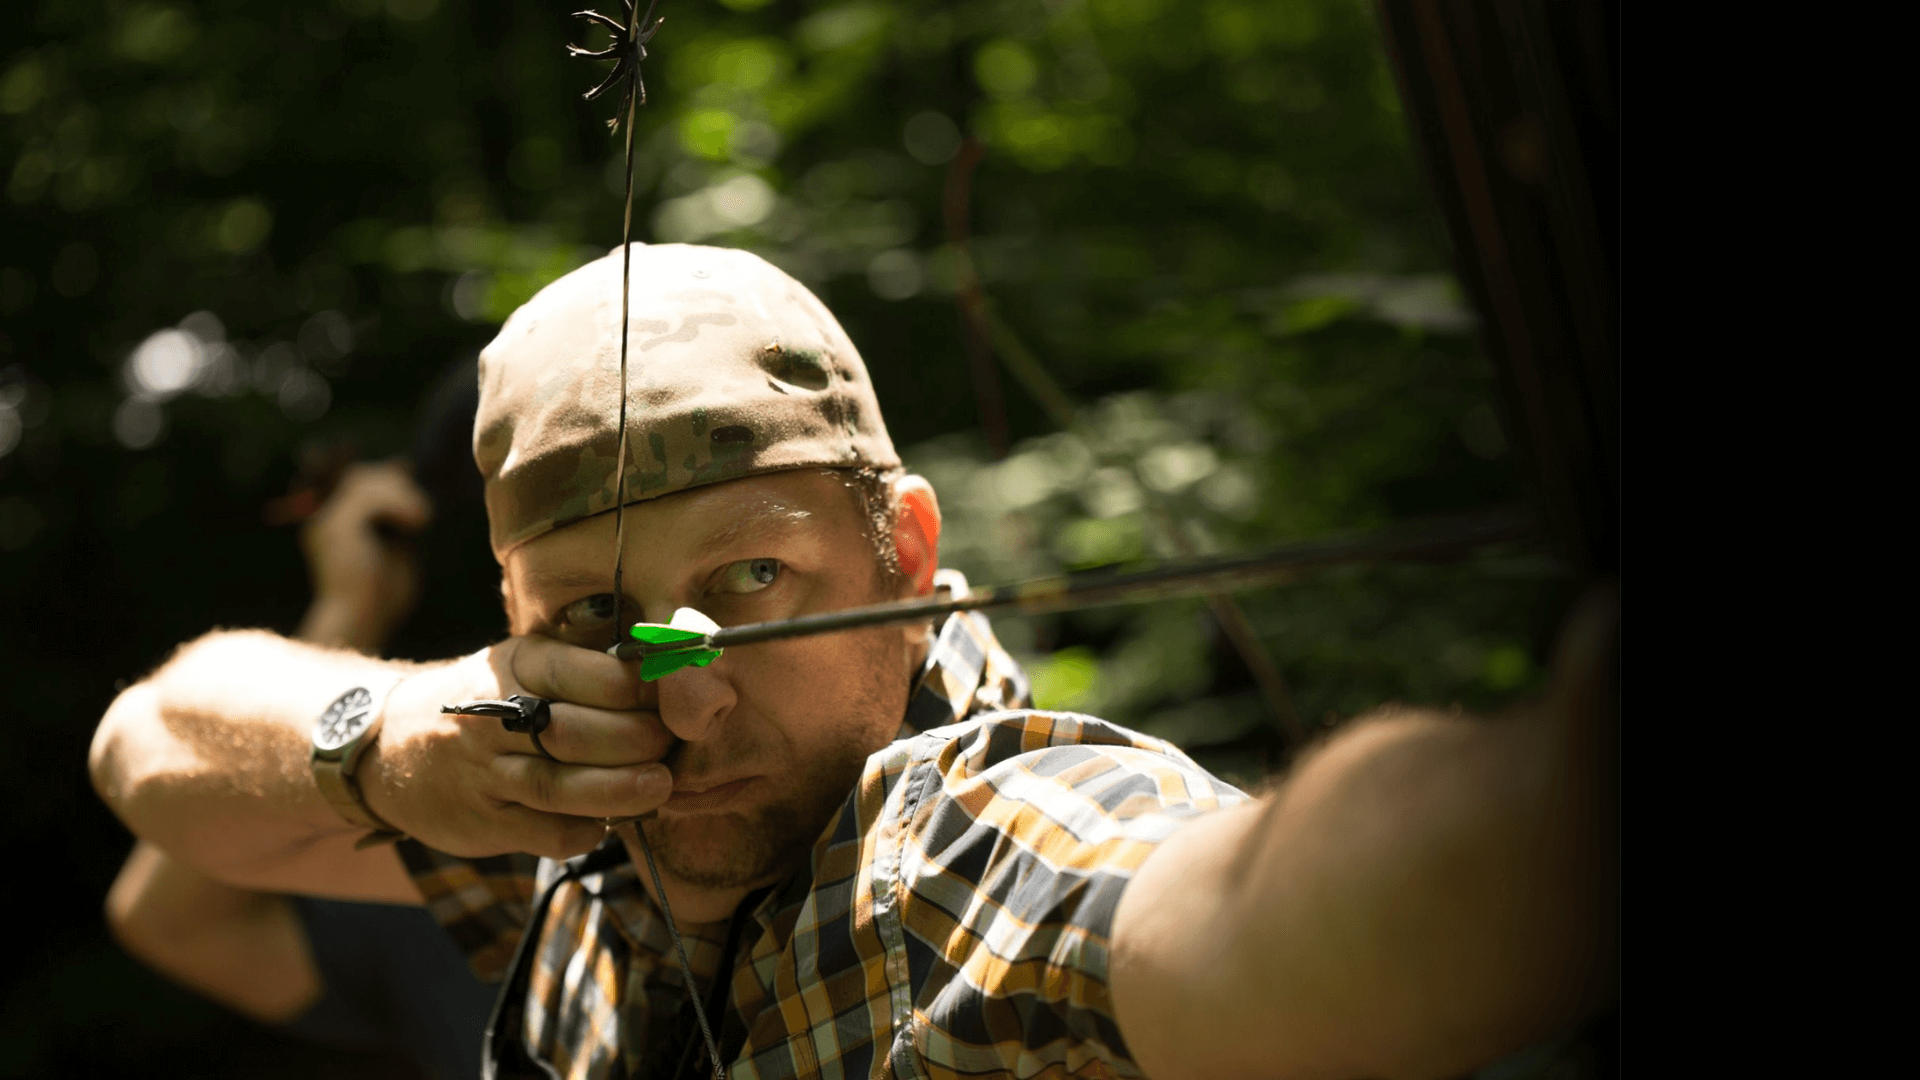 Tuning for the Diehard Traditional Bowhunter. Learn the true science behind tuning traditional bows to make your bows quieter, more efficient and penetrate better!﻿